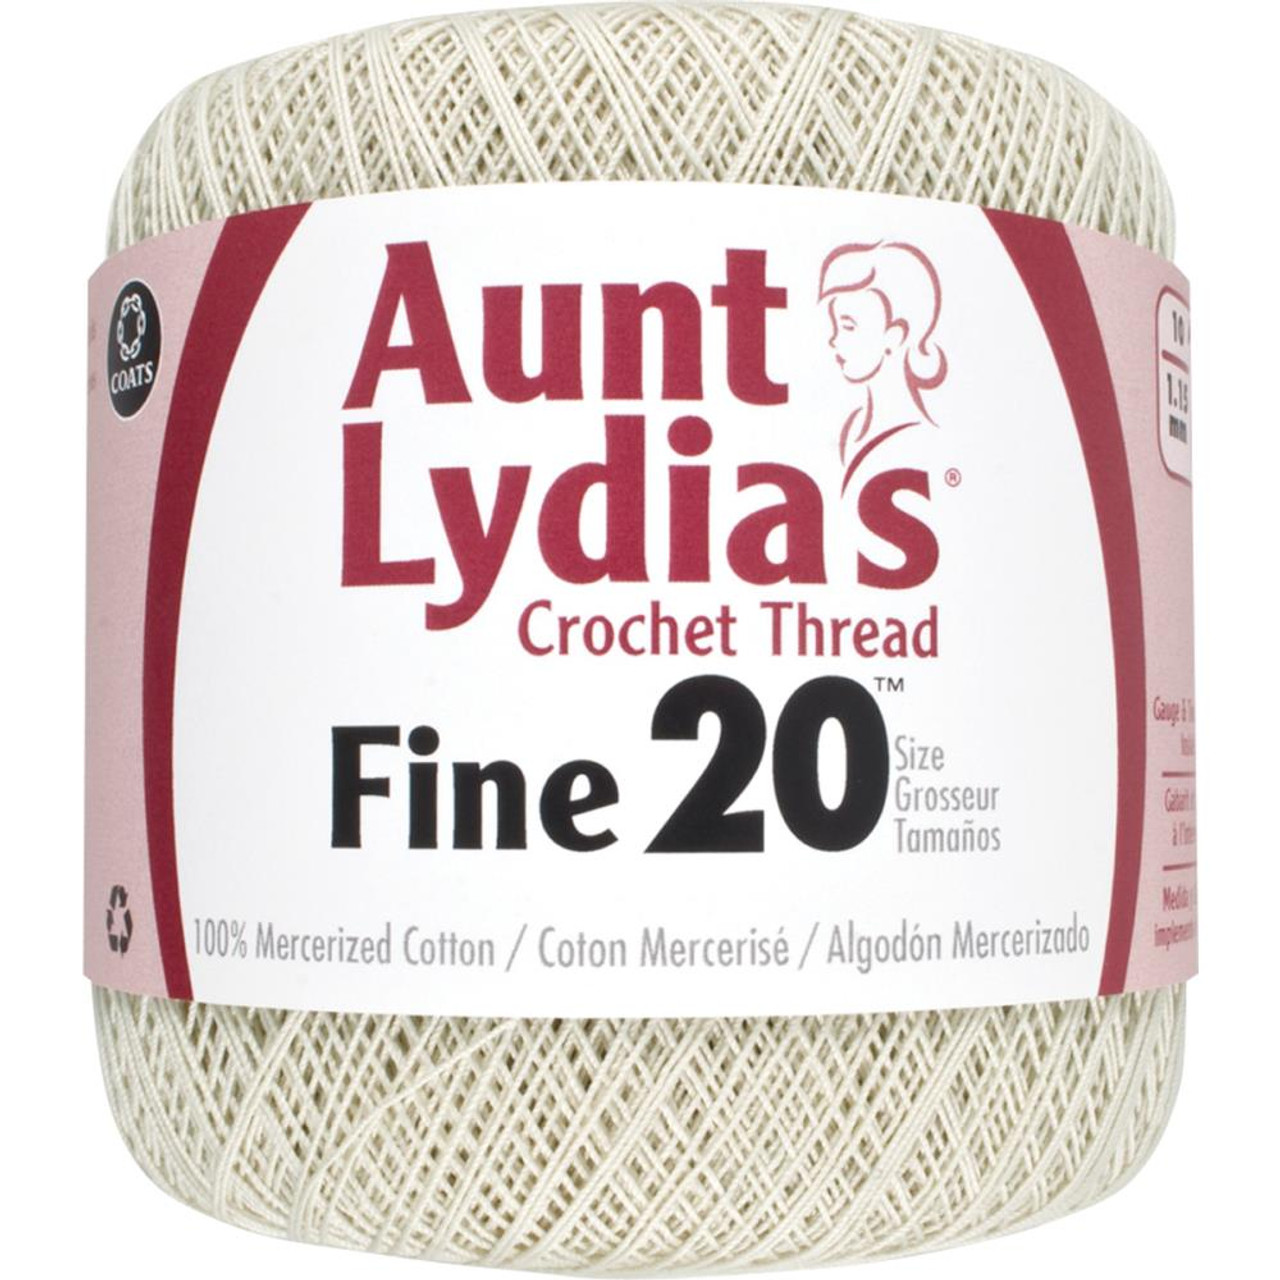 Glitter Crochet Thread cotton Thick Yarn for sweater making Scarf DIY  Making